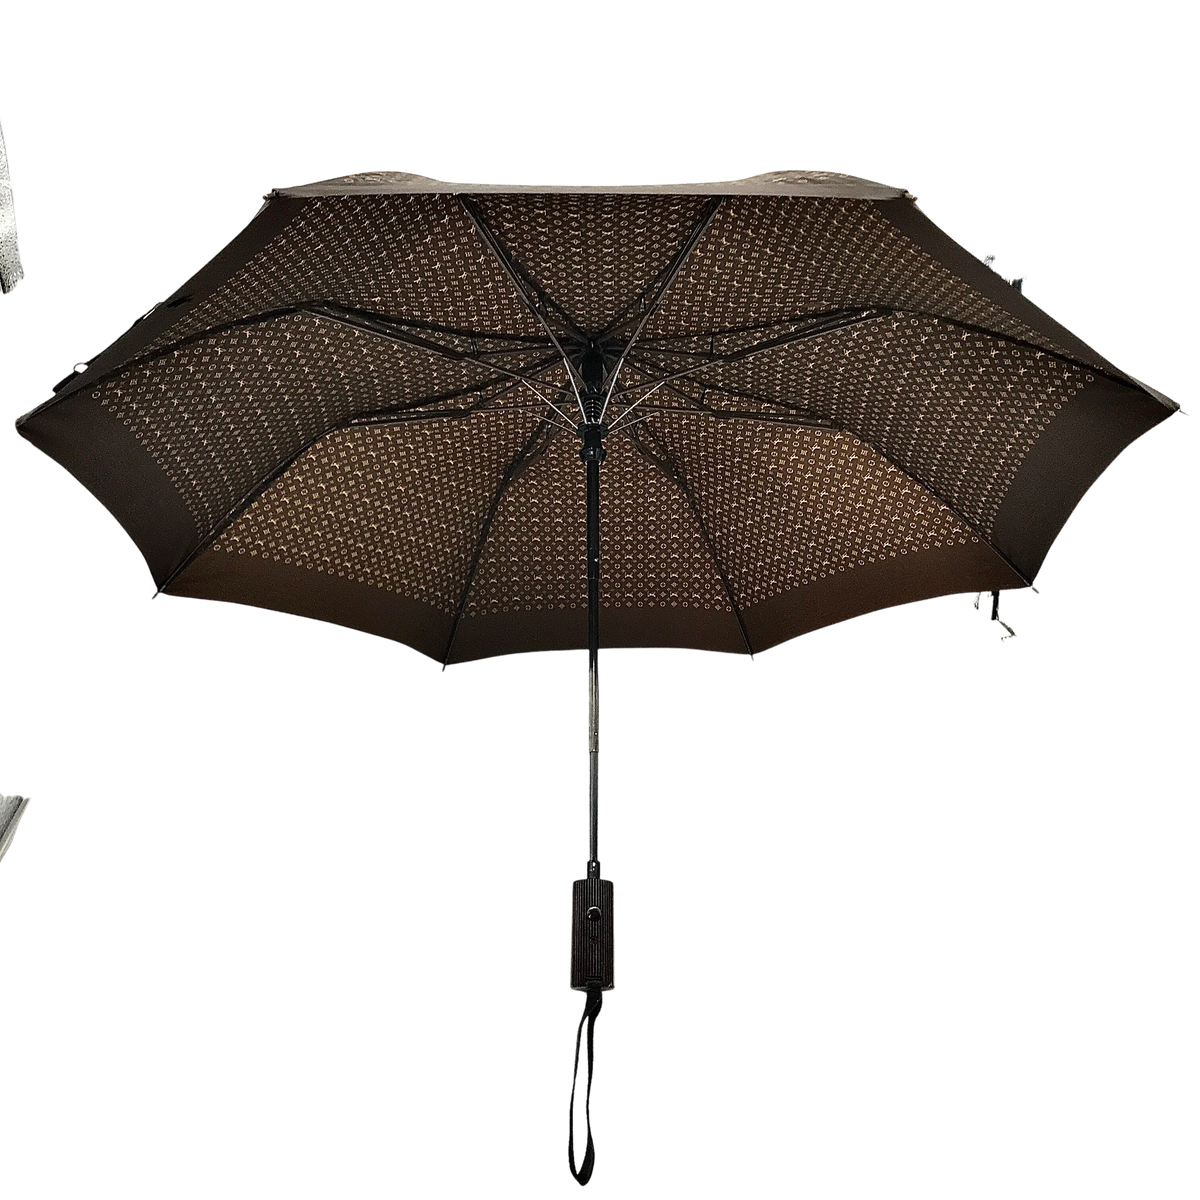 Pre-Owned Louis Vuitton folding umbrella Fondation museum one-touch button  Foldable jumping (Good) 